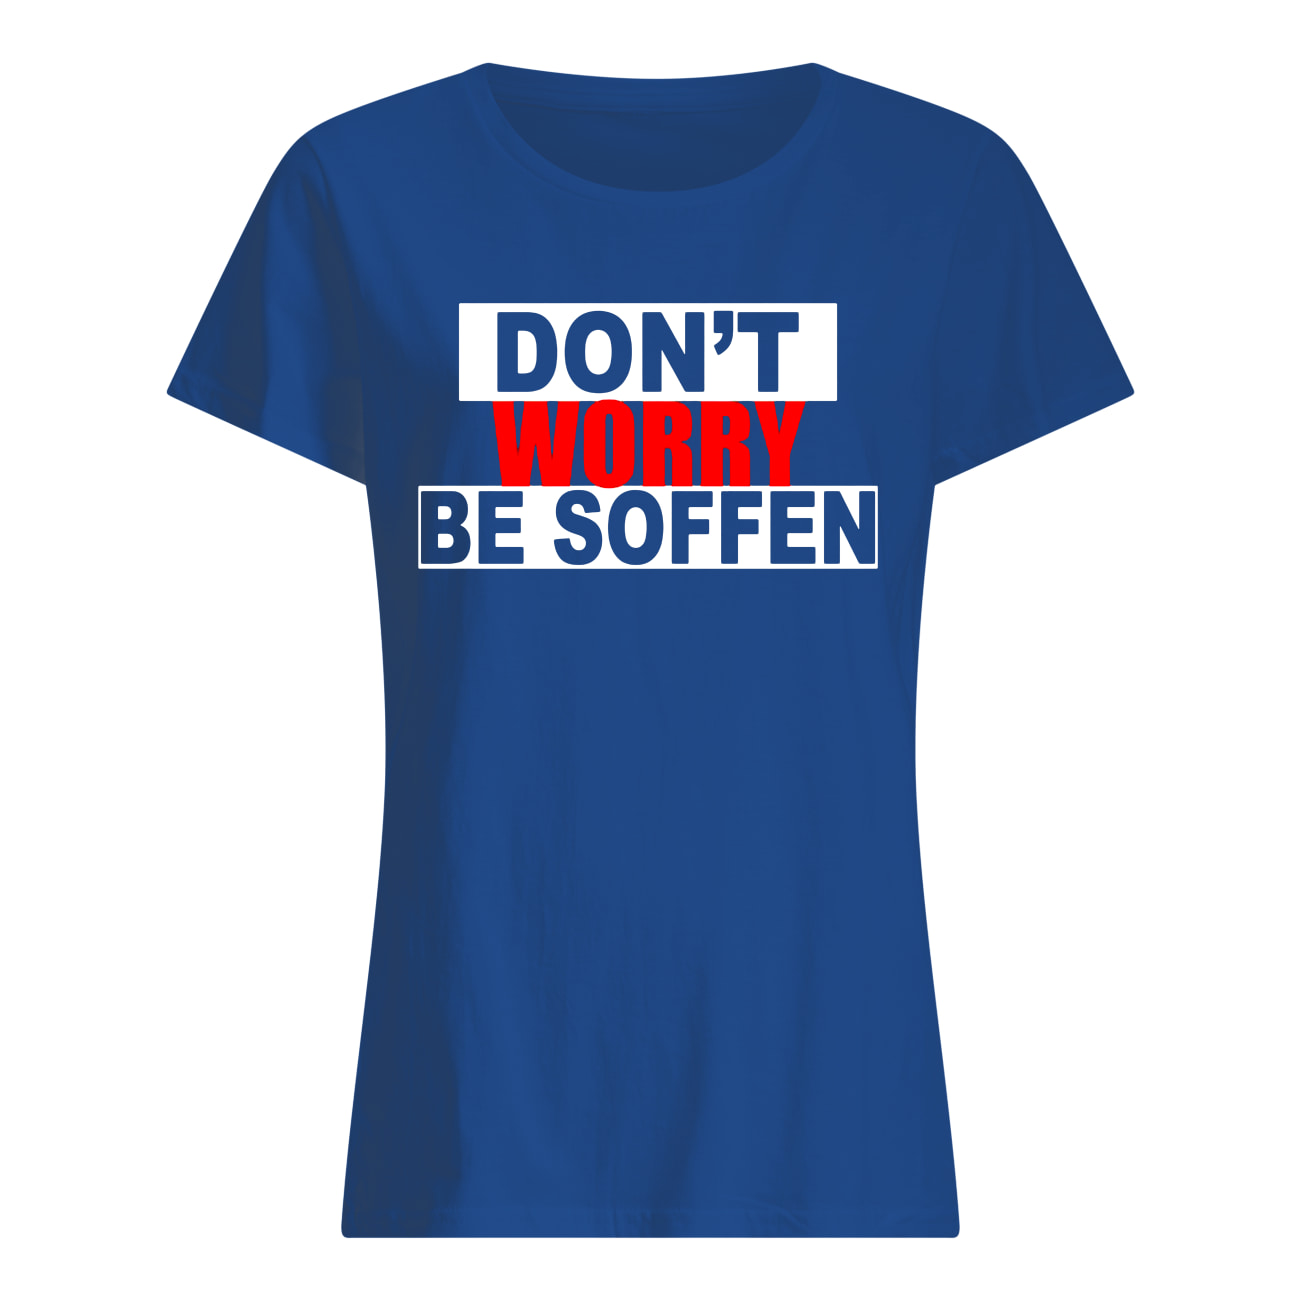 Don't worry be soffen womens shirt